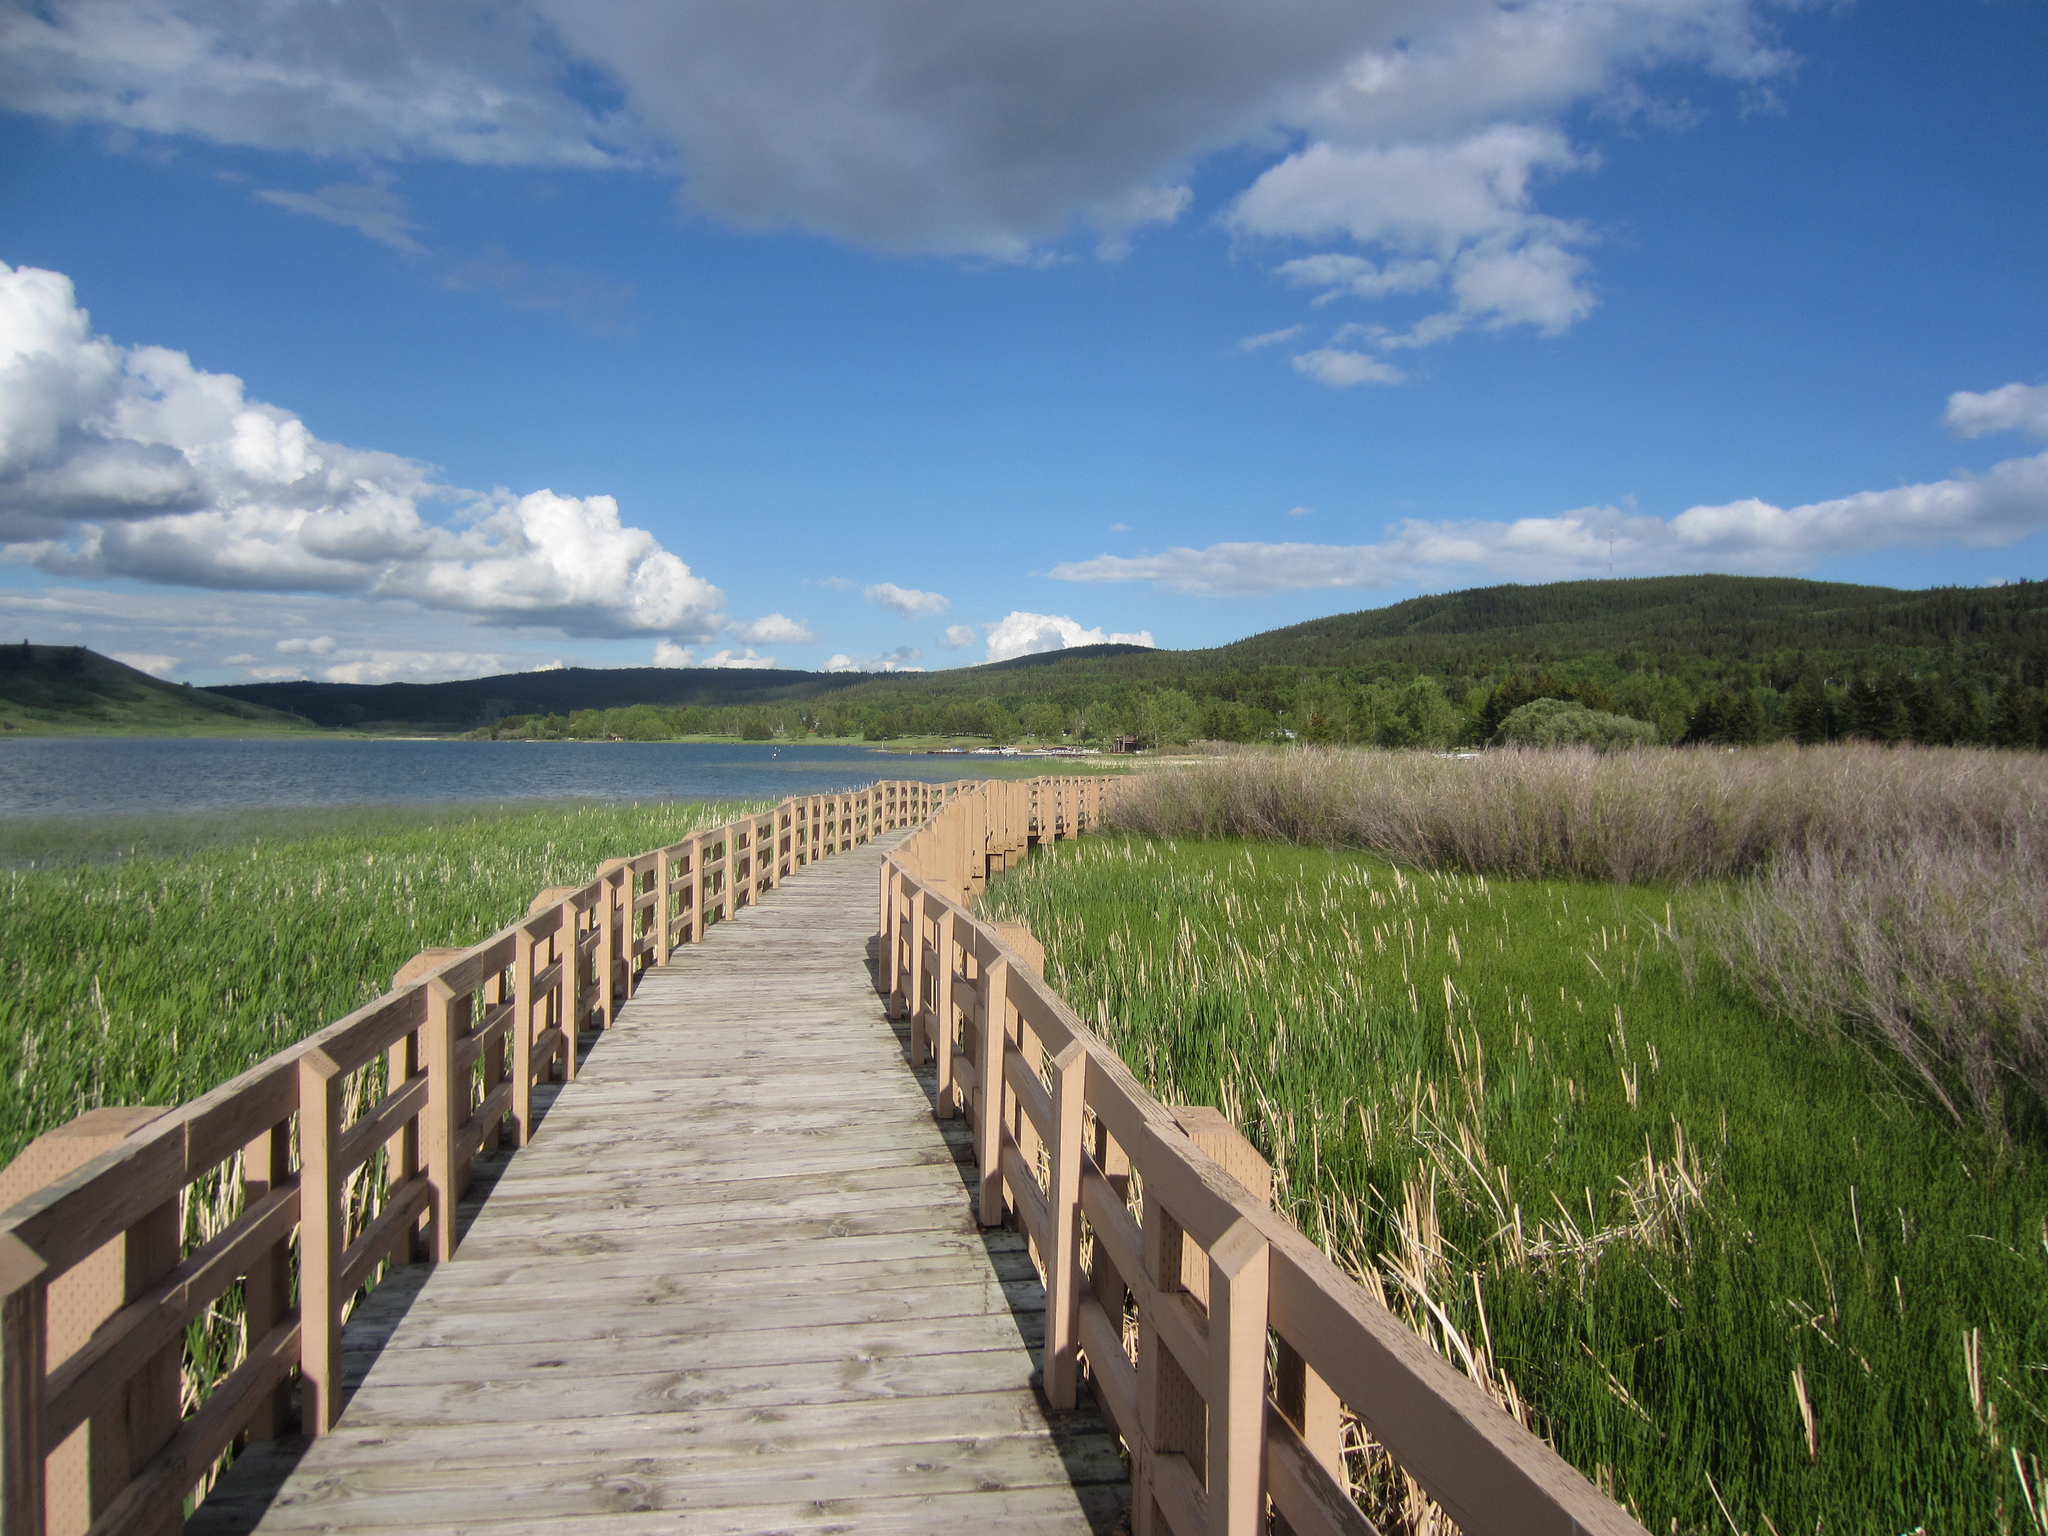 A walking bridge cuts between the tall grasses that grow in the shallow edges of a lake